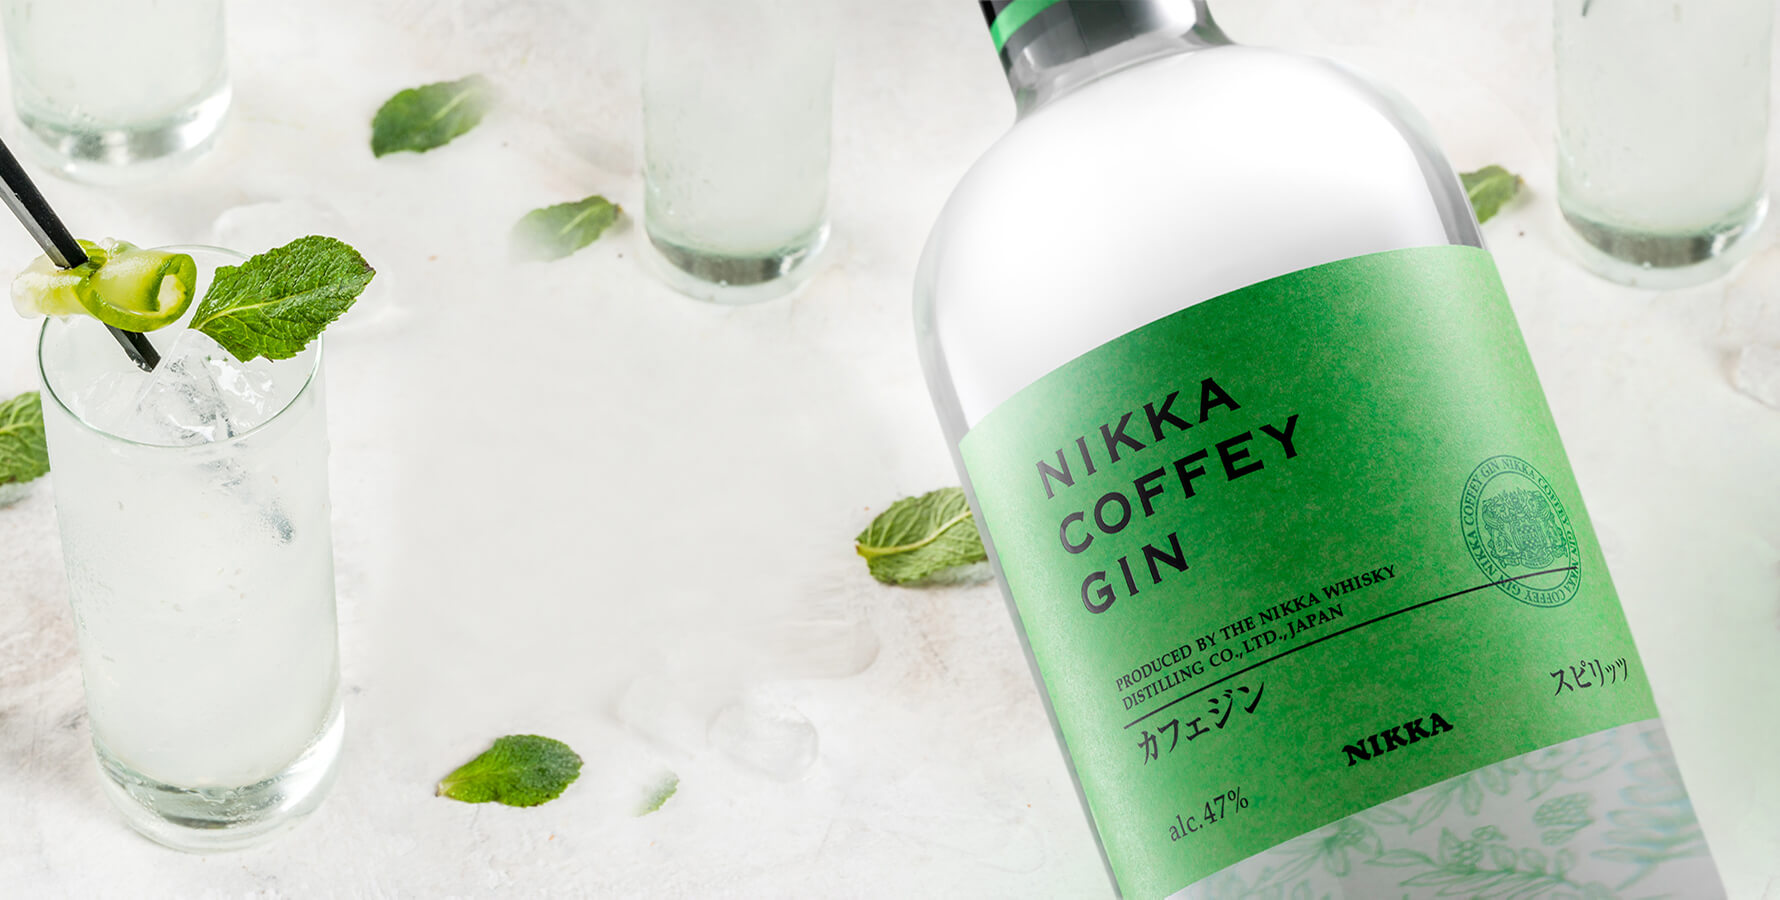 Discovering the Exquisite Flavors of Nikka Coffey Gin in Singapore